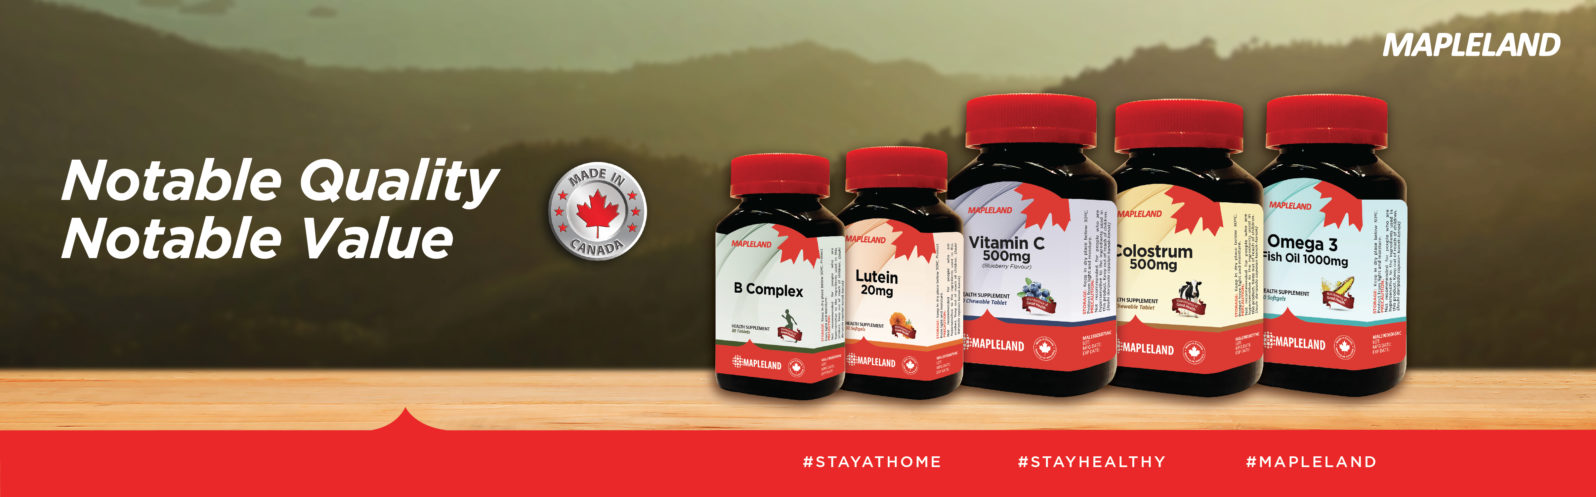 Mapleland is Canada brand vitamin and supplement for your family.